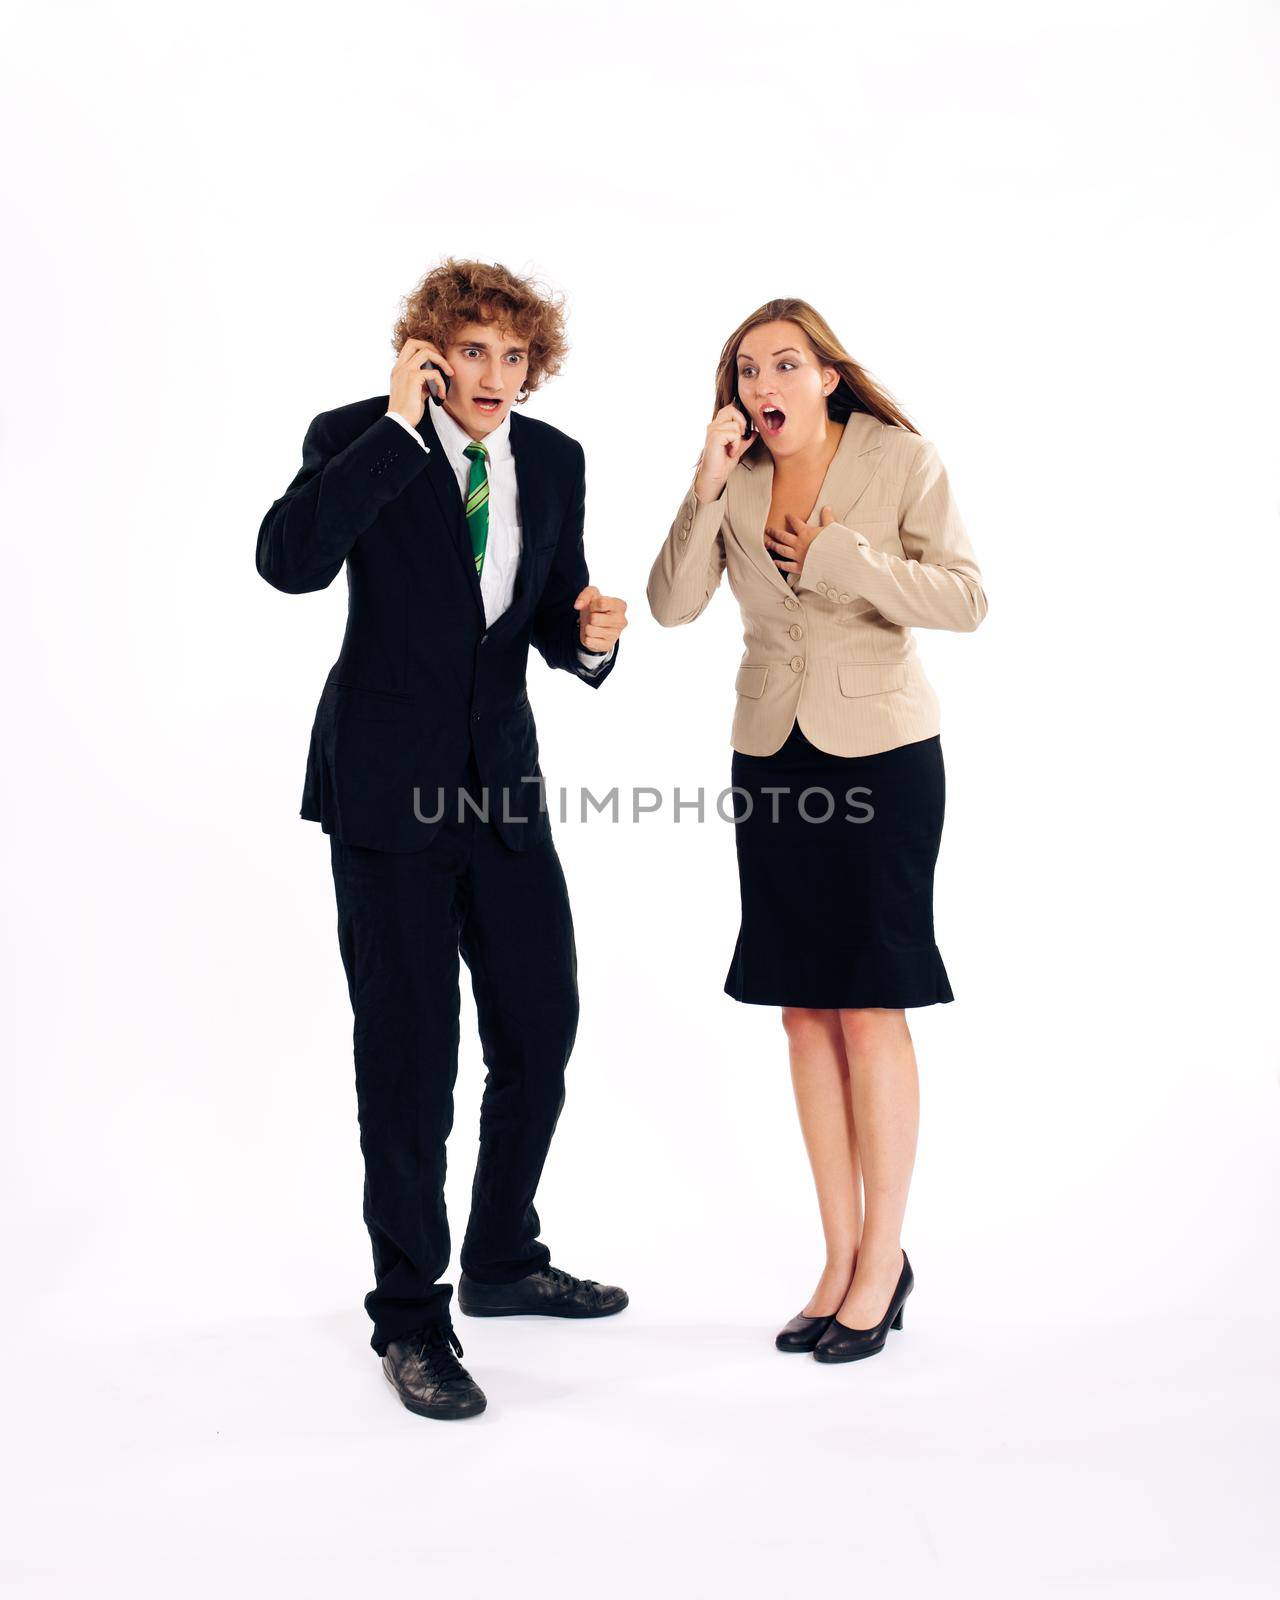 Business people - both are on their mobile phone, he is shouting in his cell phone